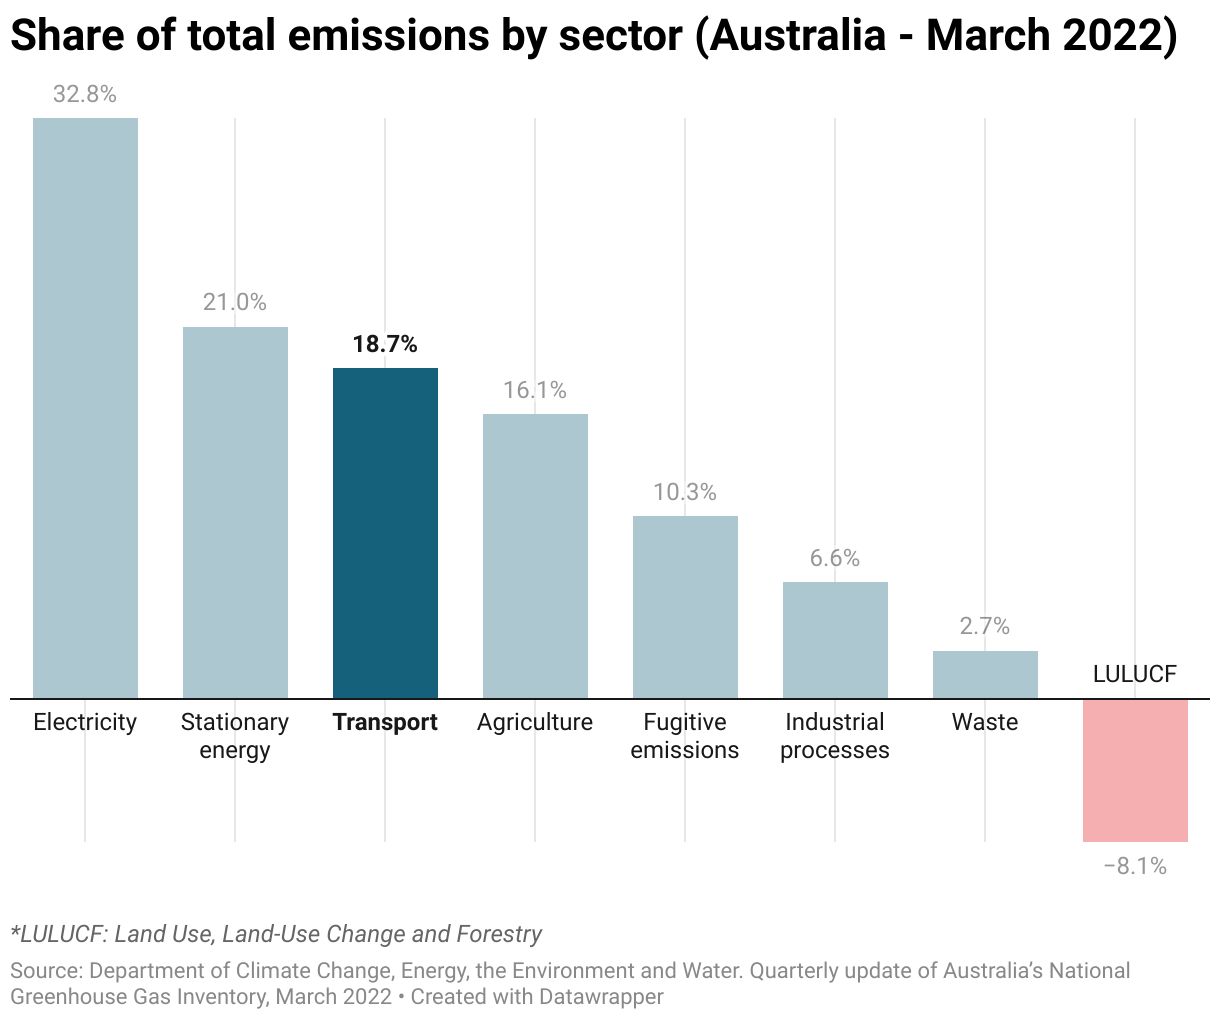 Graph showing the share of total emissions by sector in Australia in March 2022, which highlights transport as having a 18.7% share of emissions.